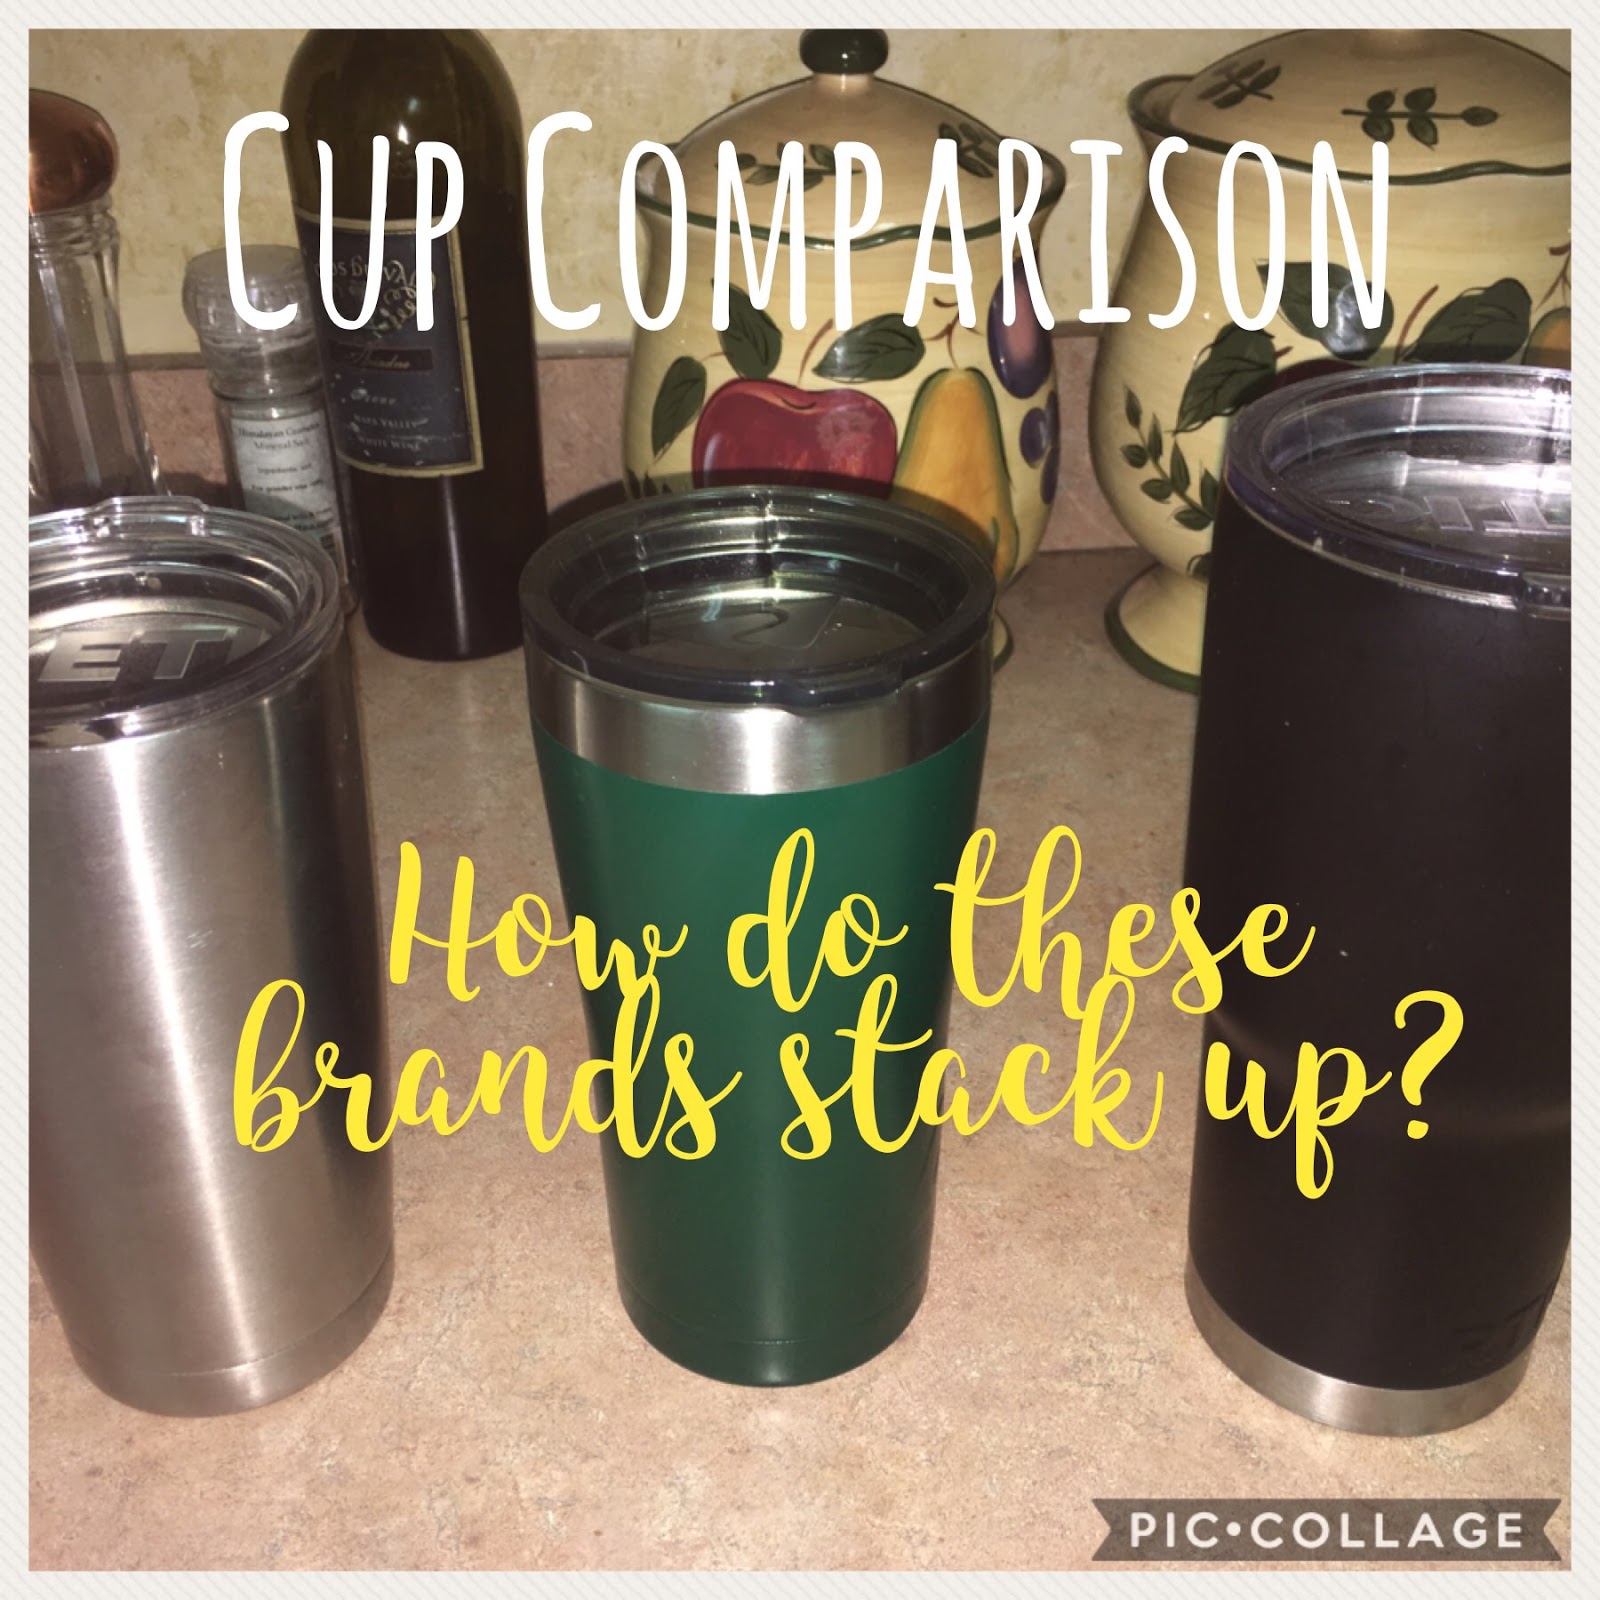 RTIC Coffee Cup v. Yeti Rambler Mug, overview and which one is better? 